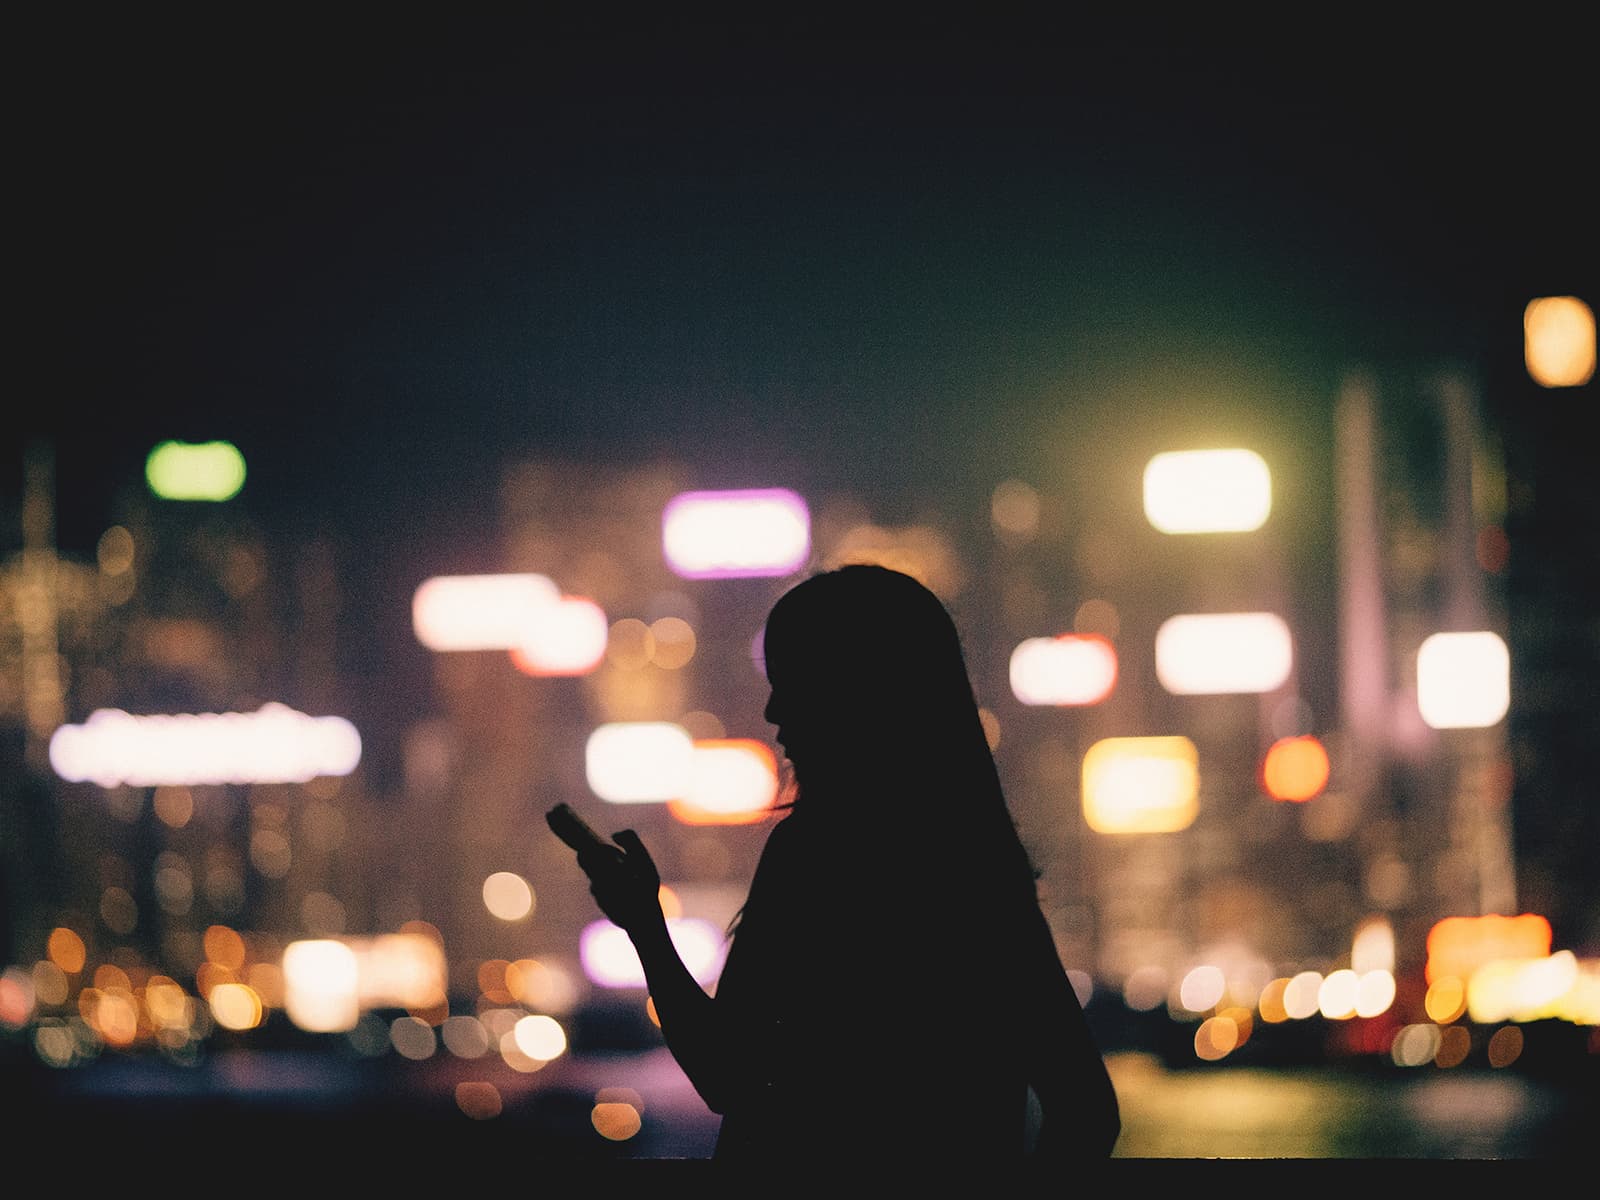 Silhouette of woman holding her phone against the nighttime city skyline